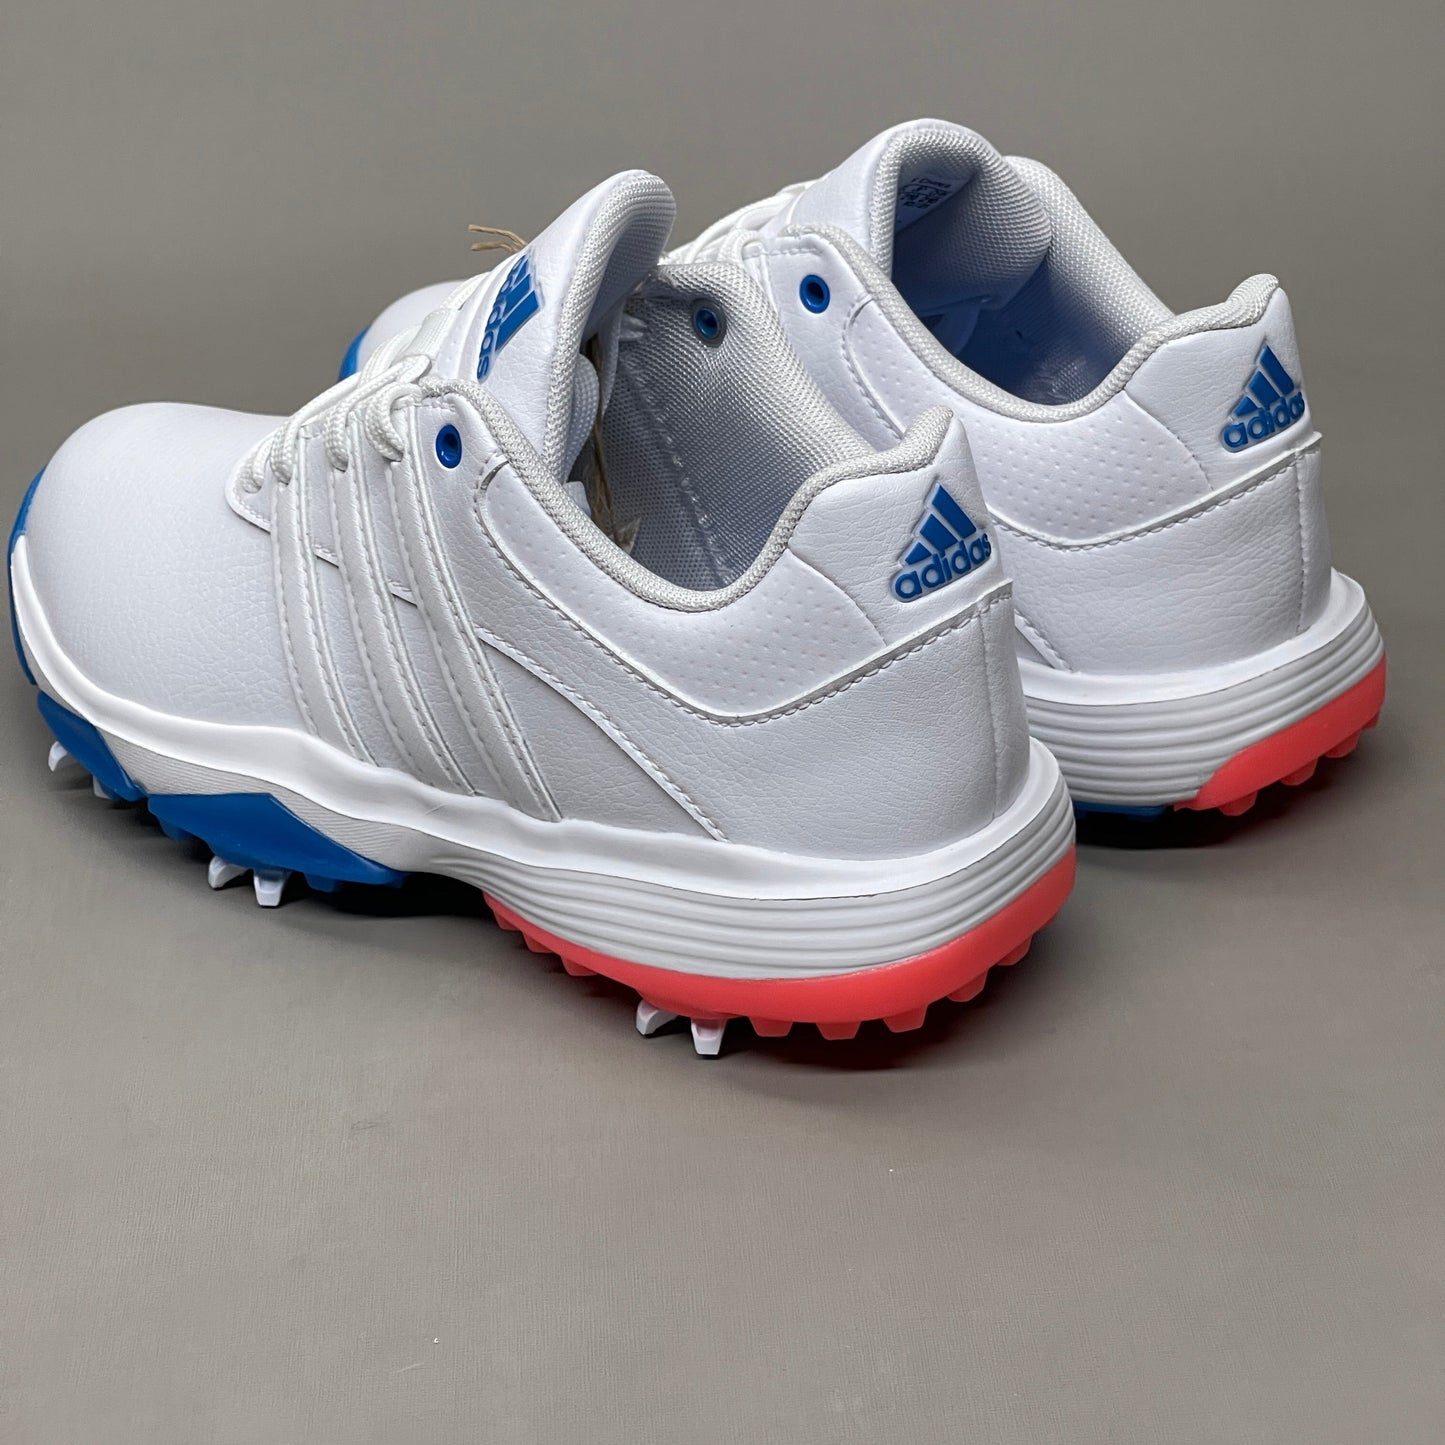 ADIDAS Golf Shoes JR360 22 Water Resistant Youth Sz 5 White / Metallic / Blue GV9665 (New)